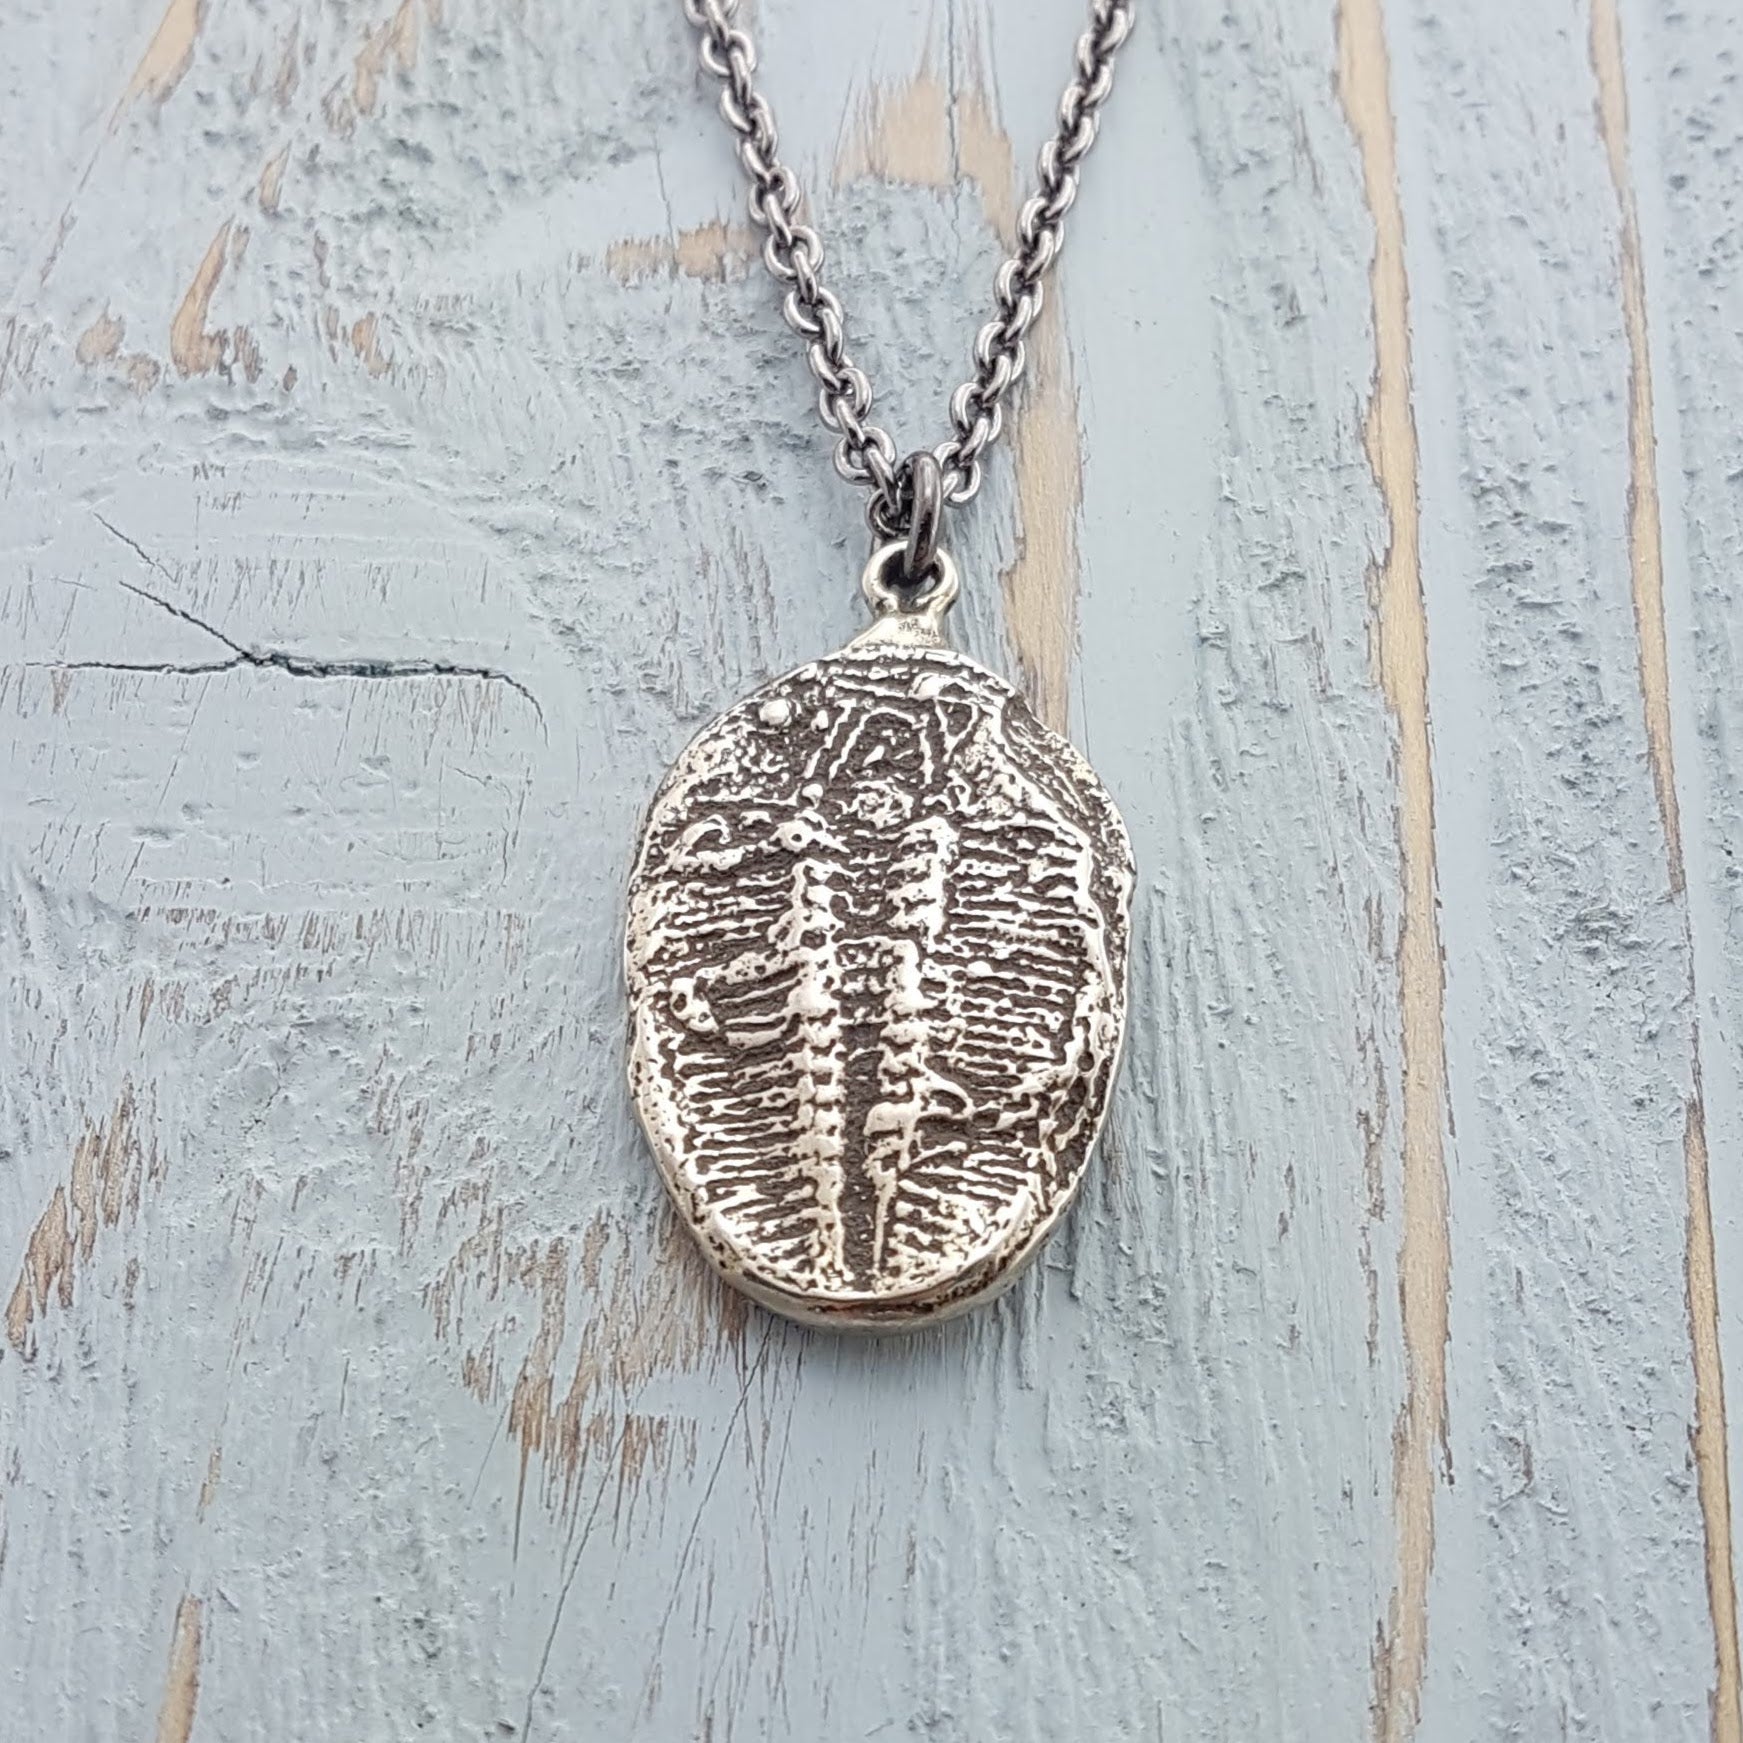 Trilobite Fossil Necklace - Gwen Delicious Jewelry Designs